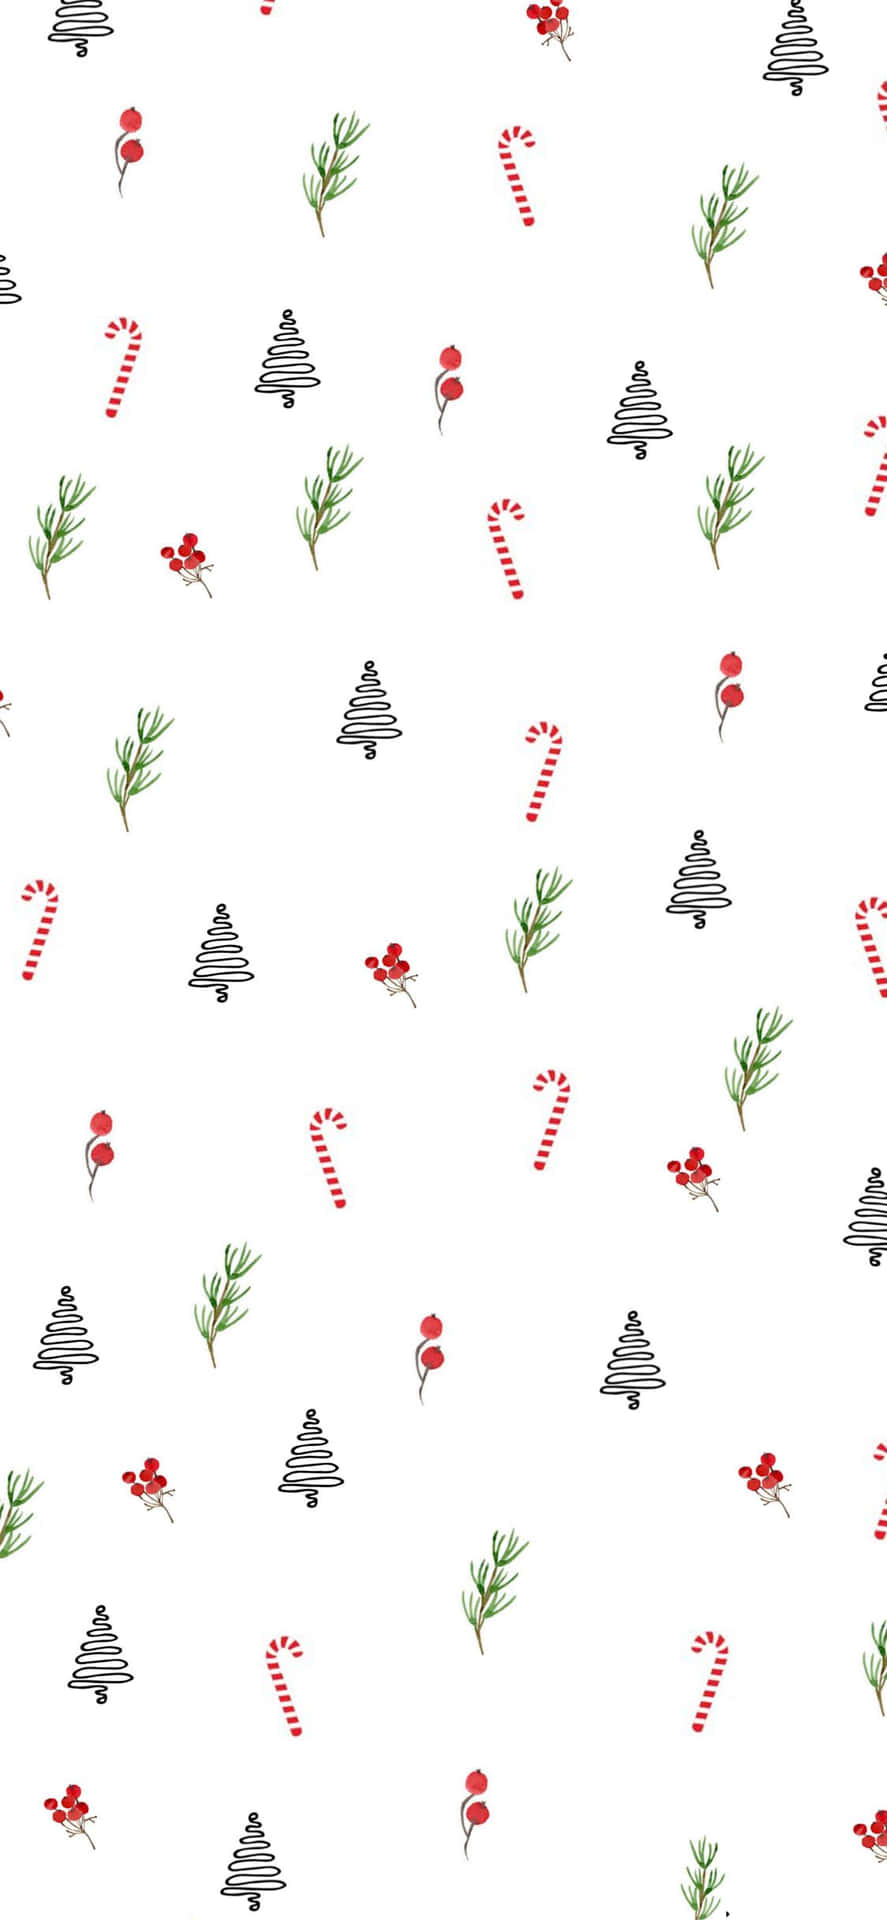 Scattered Simple Aesthetic Cute Christmas Adornments Wallpaper